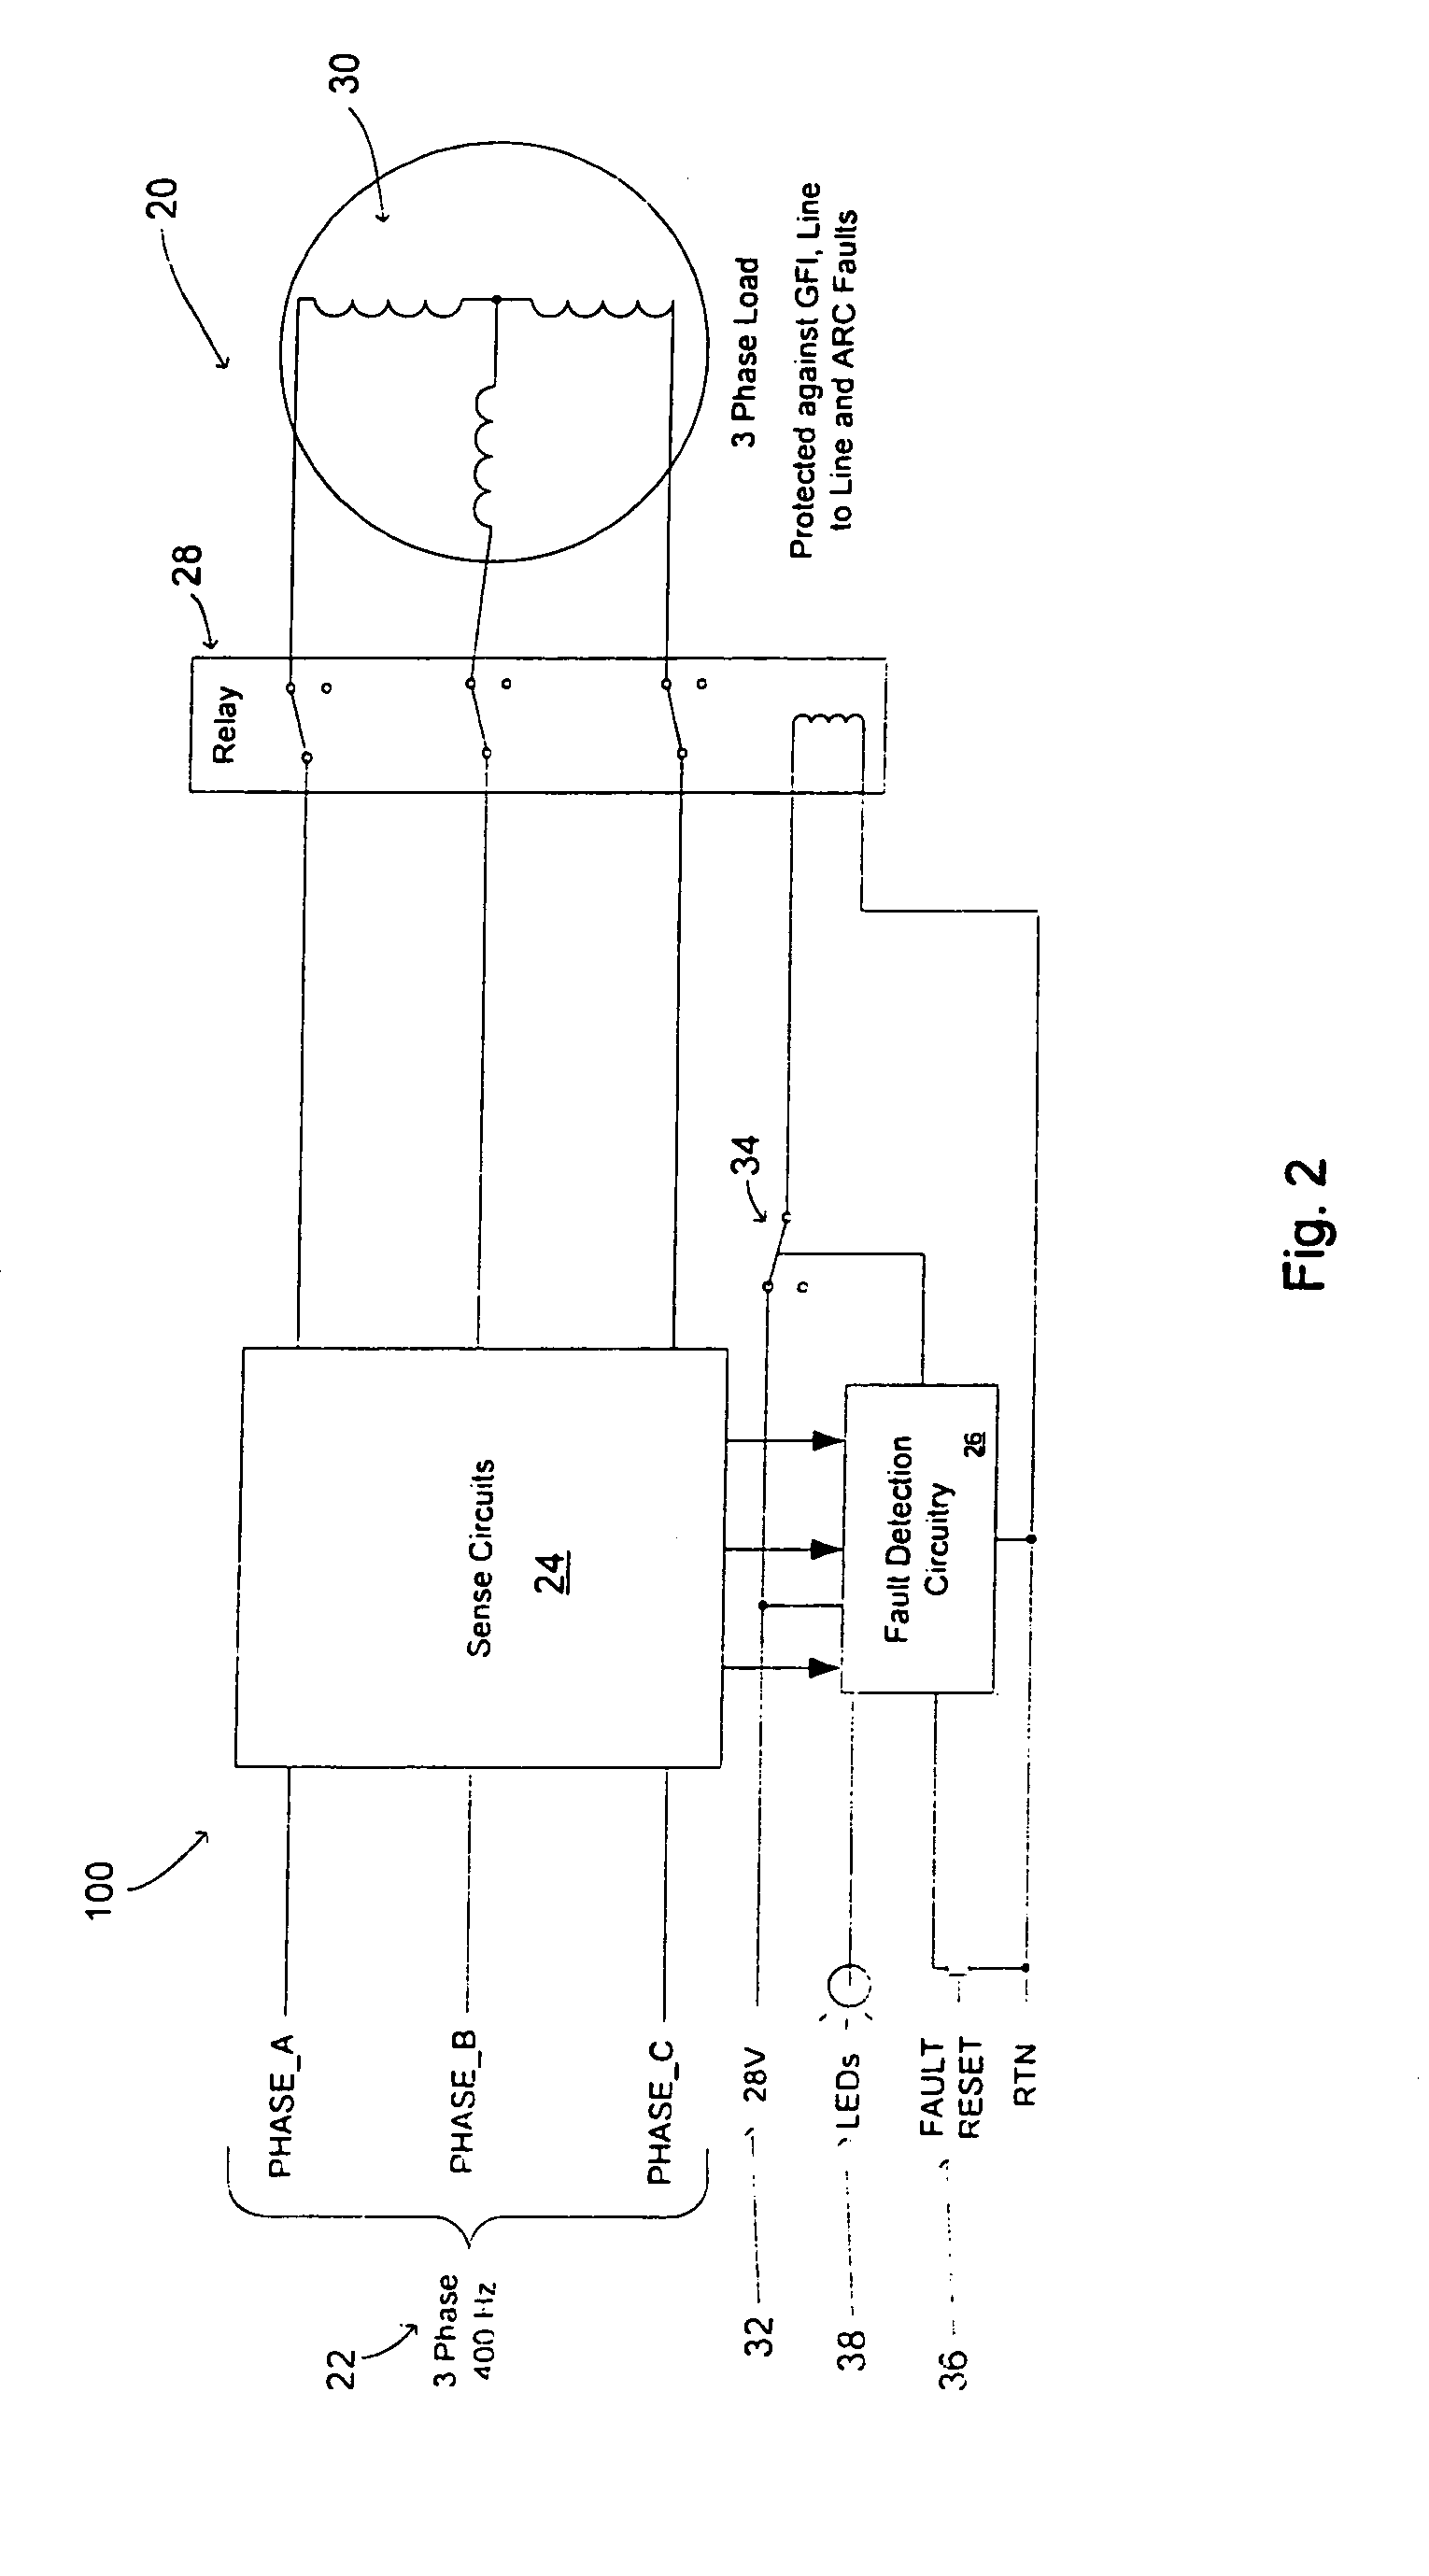 Method of detecting run-dry conditions in fuel systems